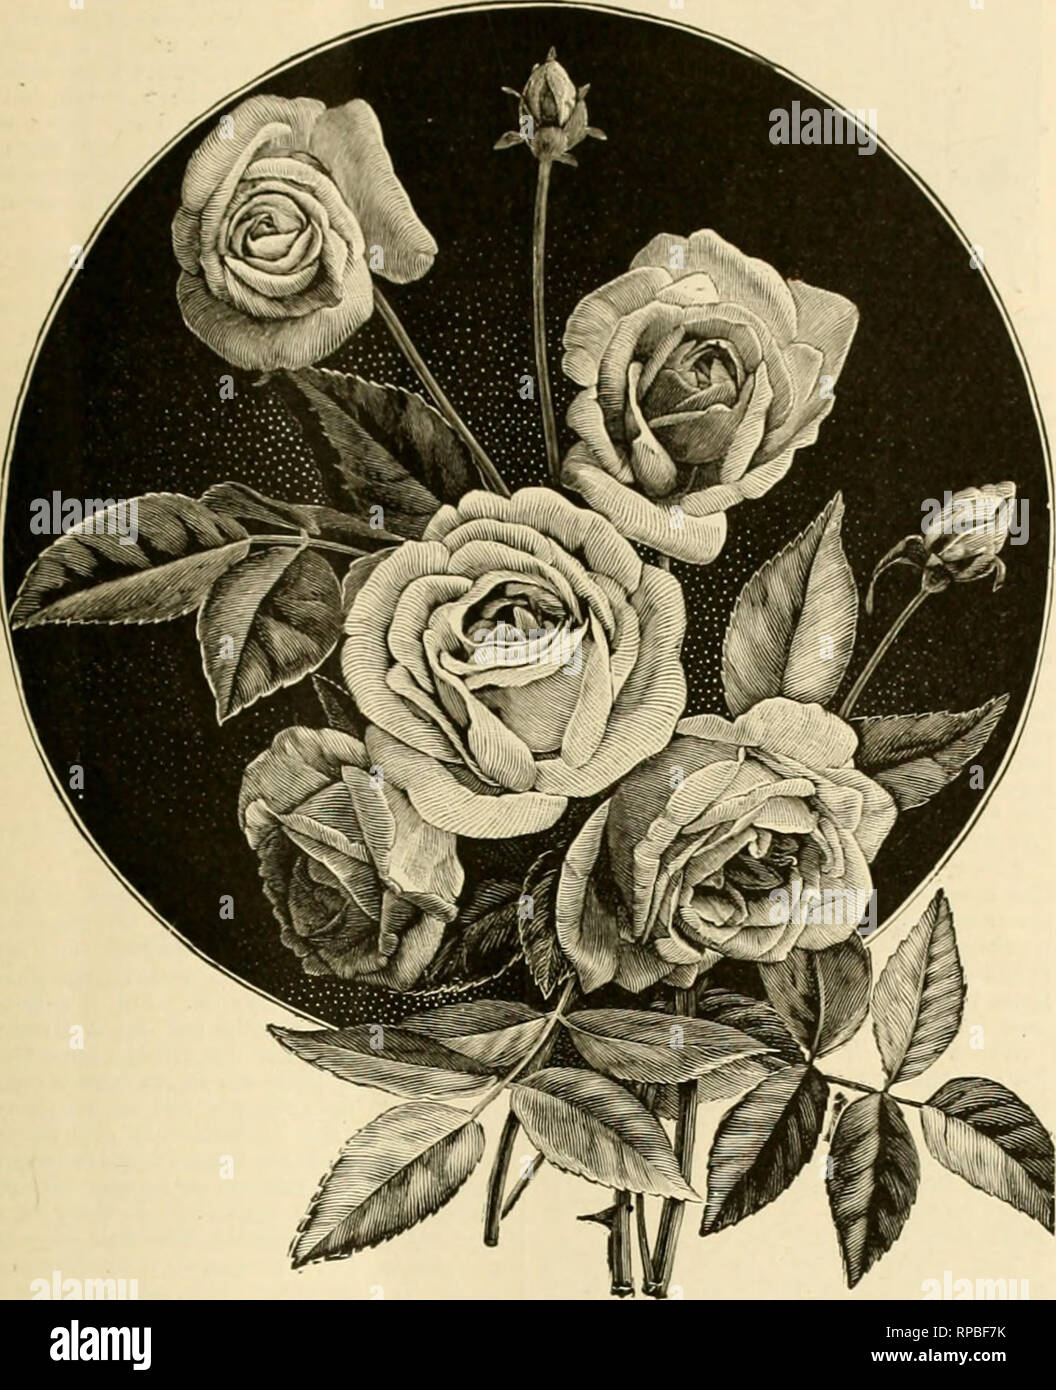 . The American florist : a weekly journal for the trade. Floriculture; Florists. i888. The American Florist. 155. PRmROSt OKWt. aid in keeping up the health and vigor of standard varieties of roses, carna- tions, etc. It was, and perhaps is yet, a custom among English gardeners to exchange cuttings of geraniums, etc. in order to keep their stock from degenerating. Darwin in one of his works, which I un- fortunate!} have not at hand for refer- ence, gives a number of experiments in proof of this method of keeping up and improving the vigor of plants. I have seen cuttings taken from the same pla Stock Photo